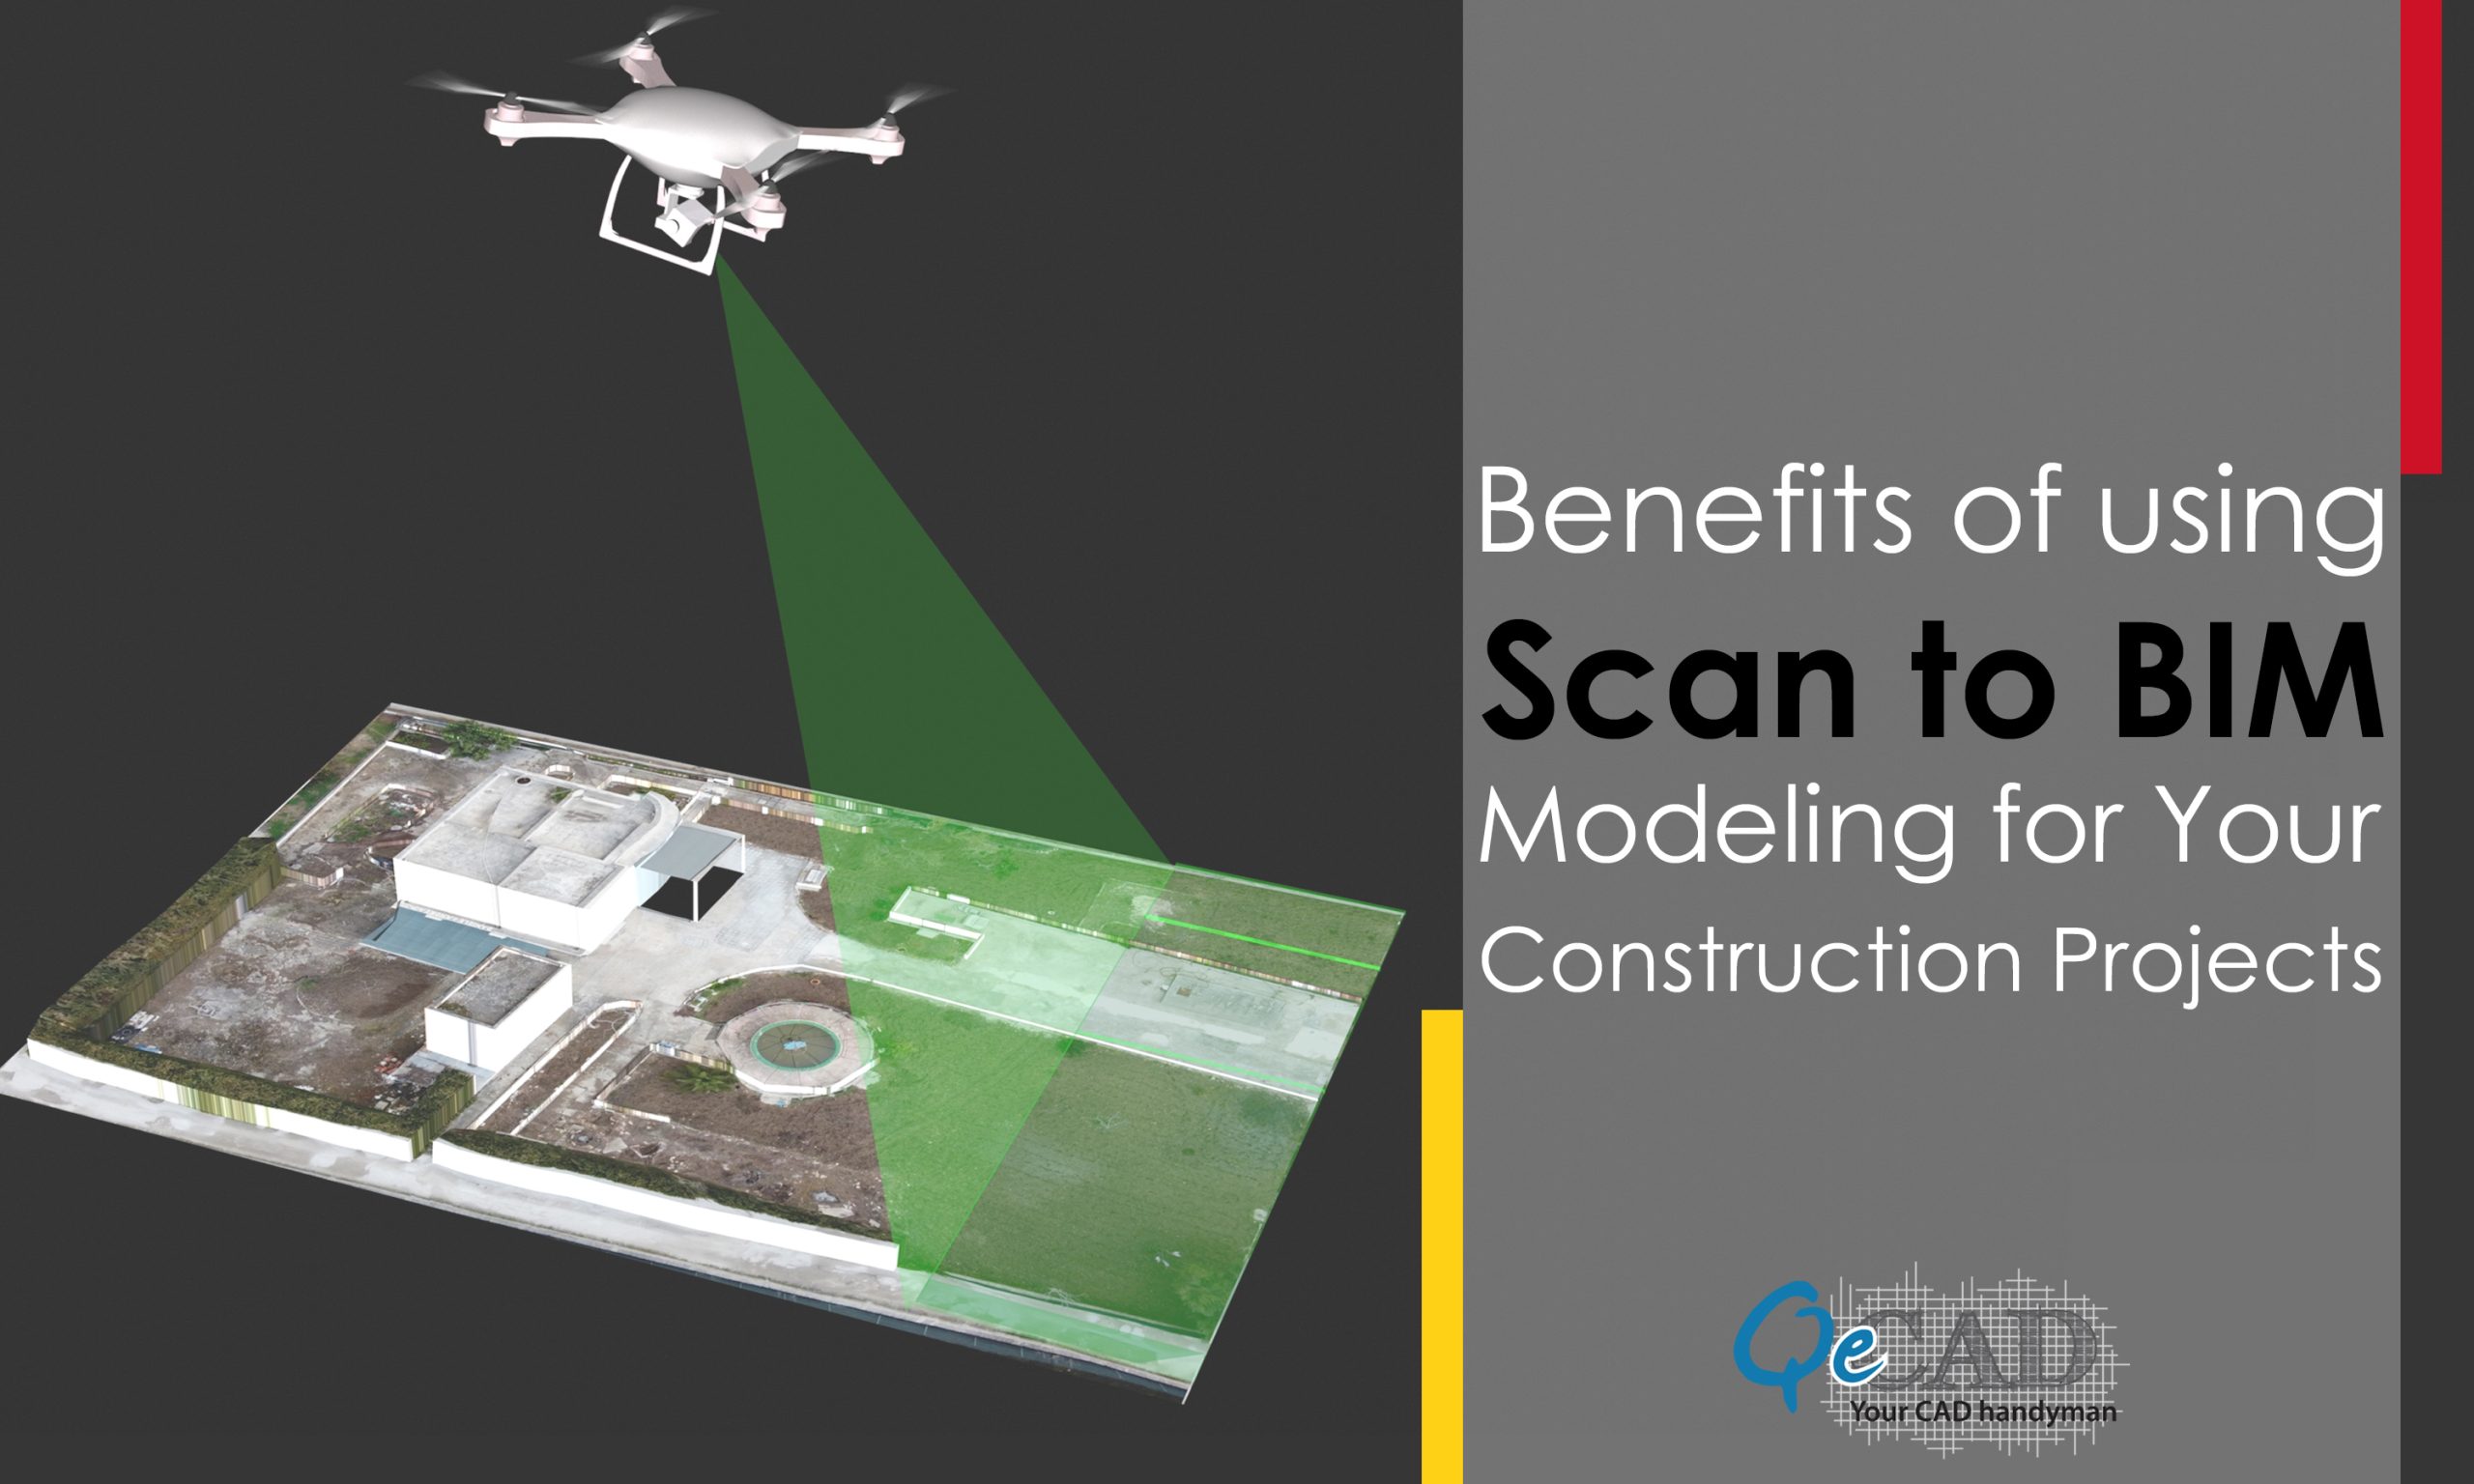 Benefits of using Scan to BIM Modeling Services for Your Construction Projects